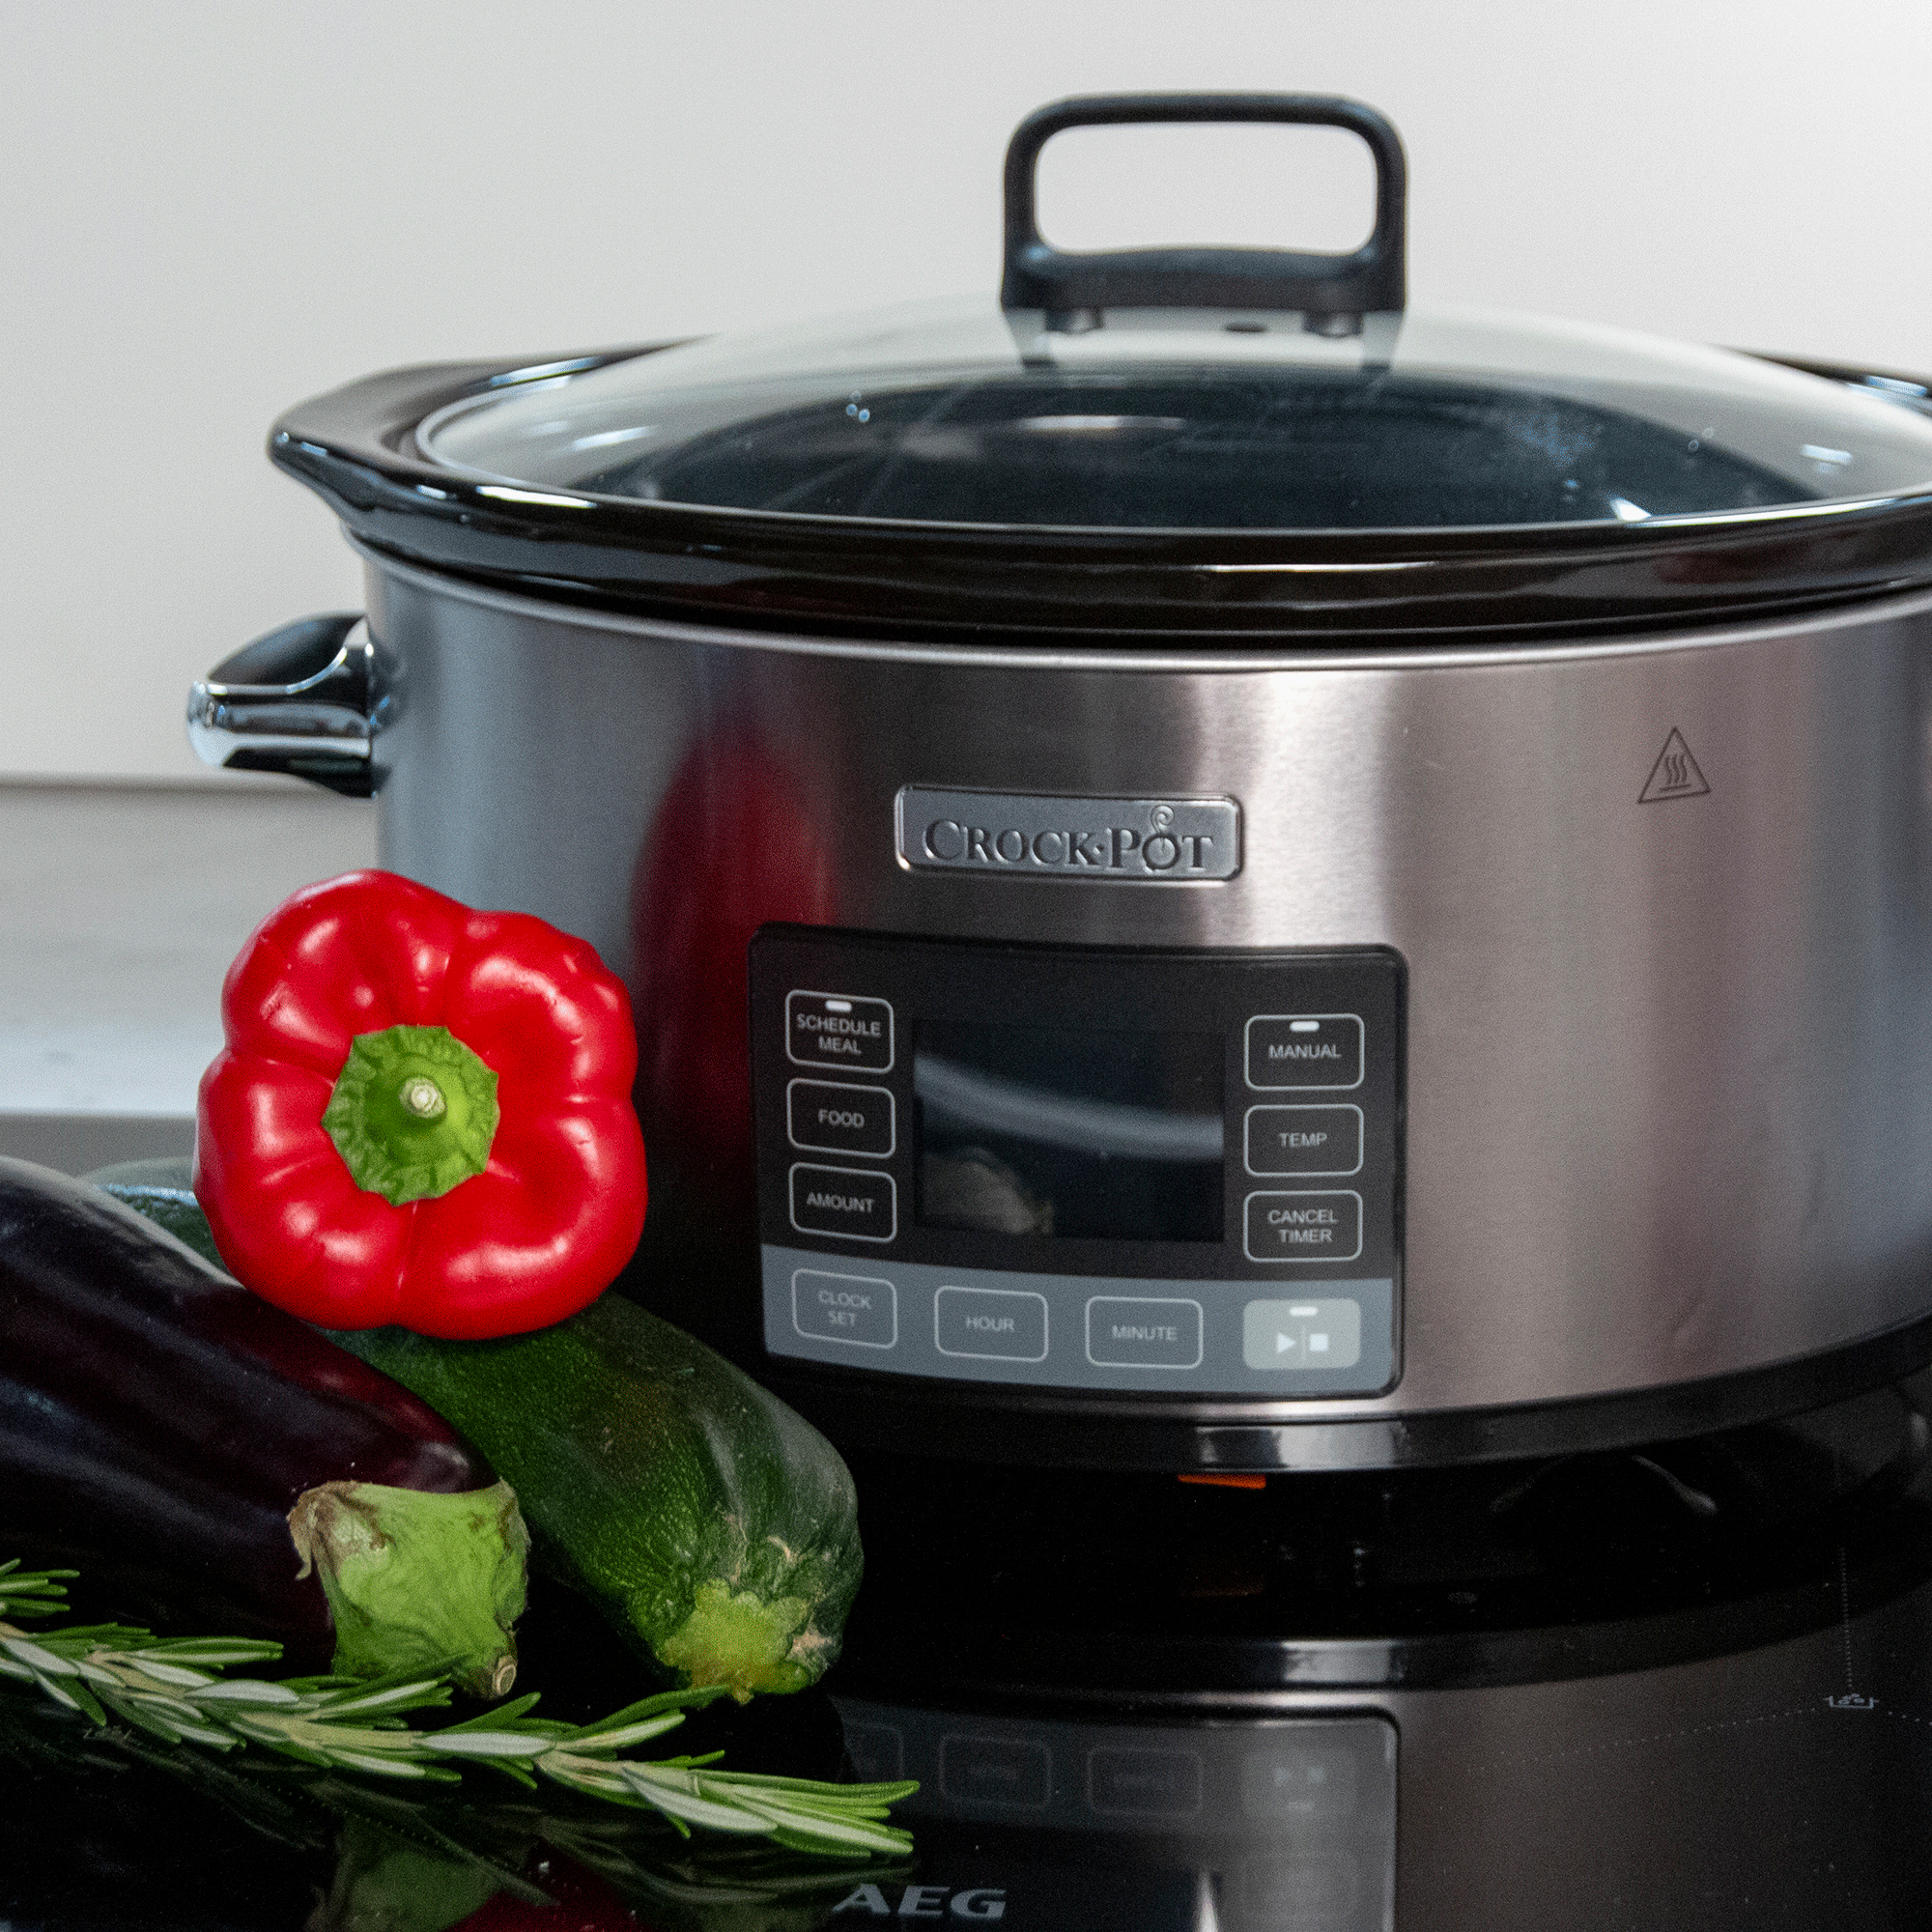 Silver slow cooker with vegetables on hob